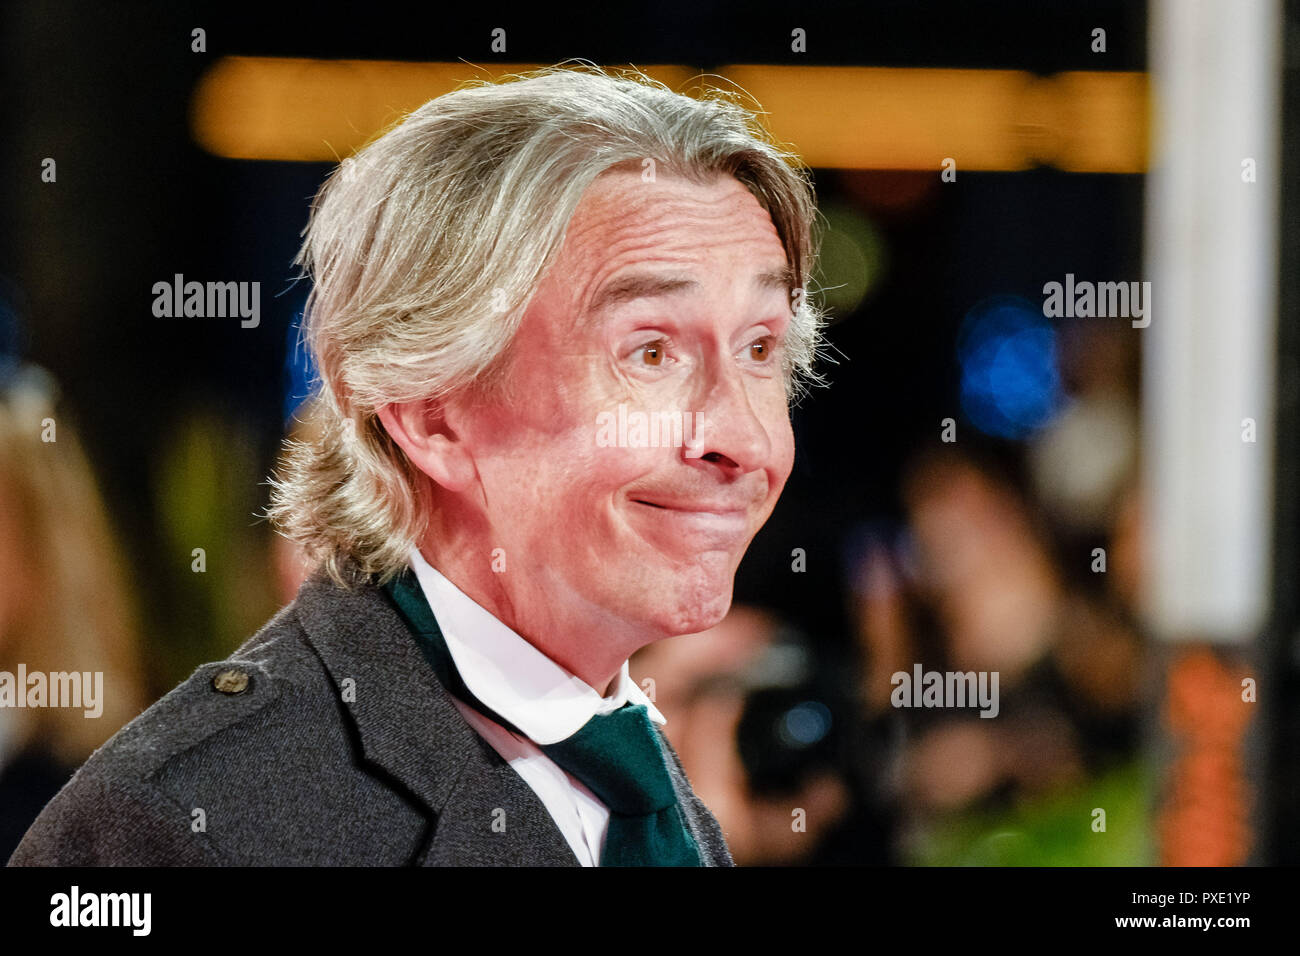 London, UK. 21st Oct 2018. Actor Steve Coogan at the London Film Festival Closing Night Gala of STAN AND OLLIE on Sunday 21 October 2018 held at Cineworld Leicester Square, London. Pictured: Steve Coogan. Picture by Julie Edwards. Credit: Julie Edwards/Alamy Live News Stock Photo